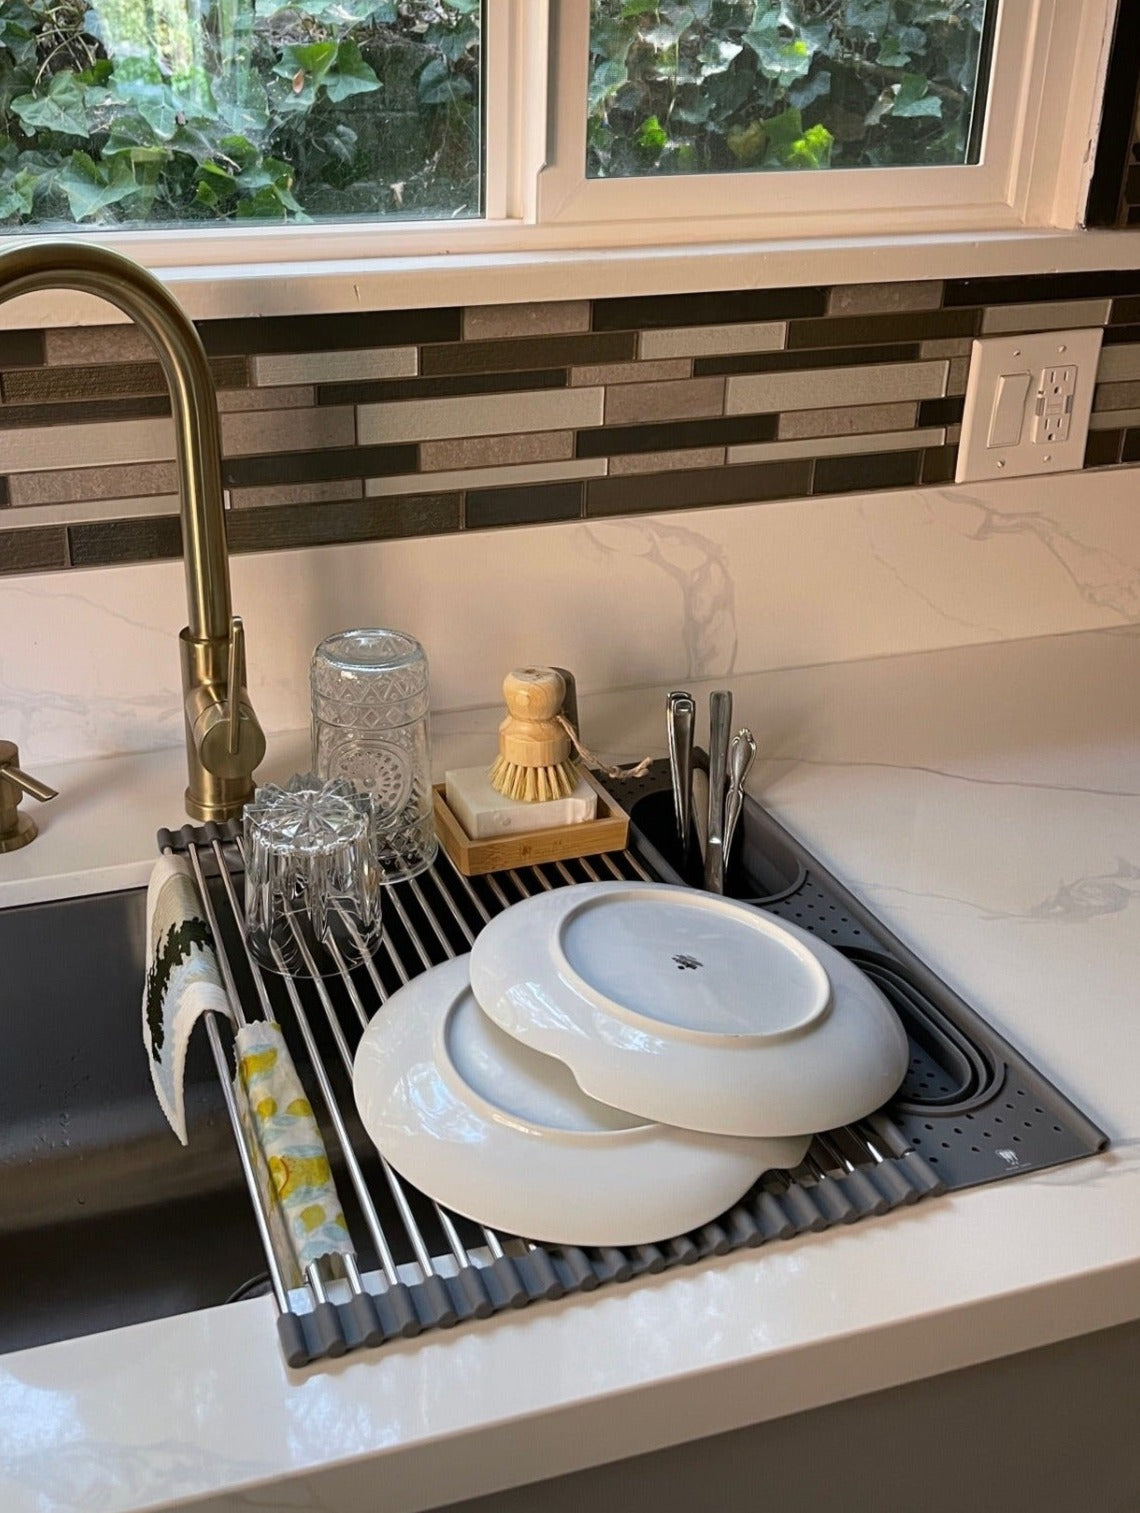 Over & Back Silicone over the Sink Dish Rack with Caddy & Reviews